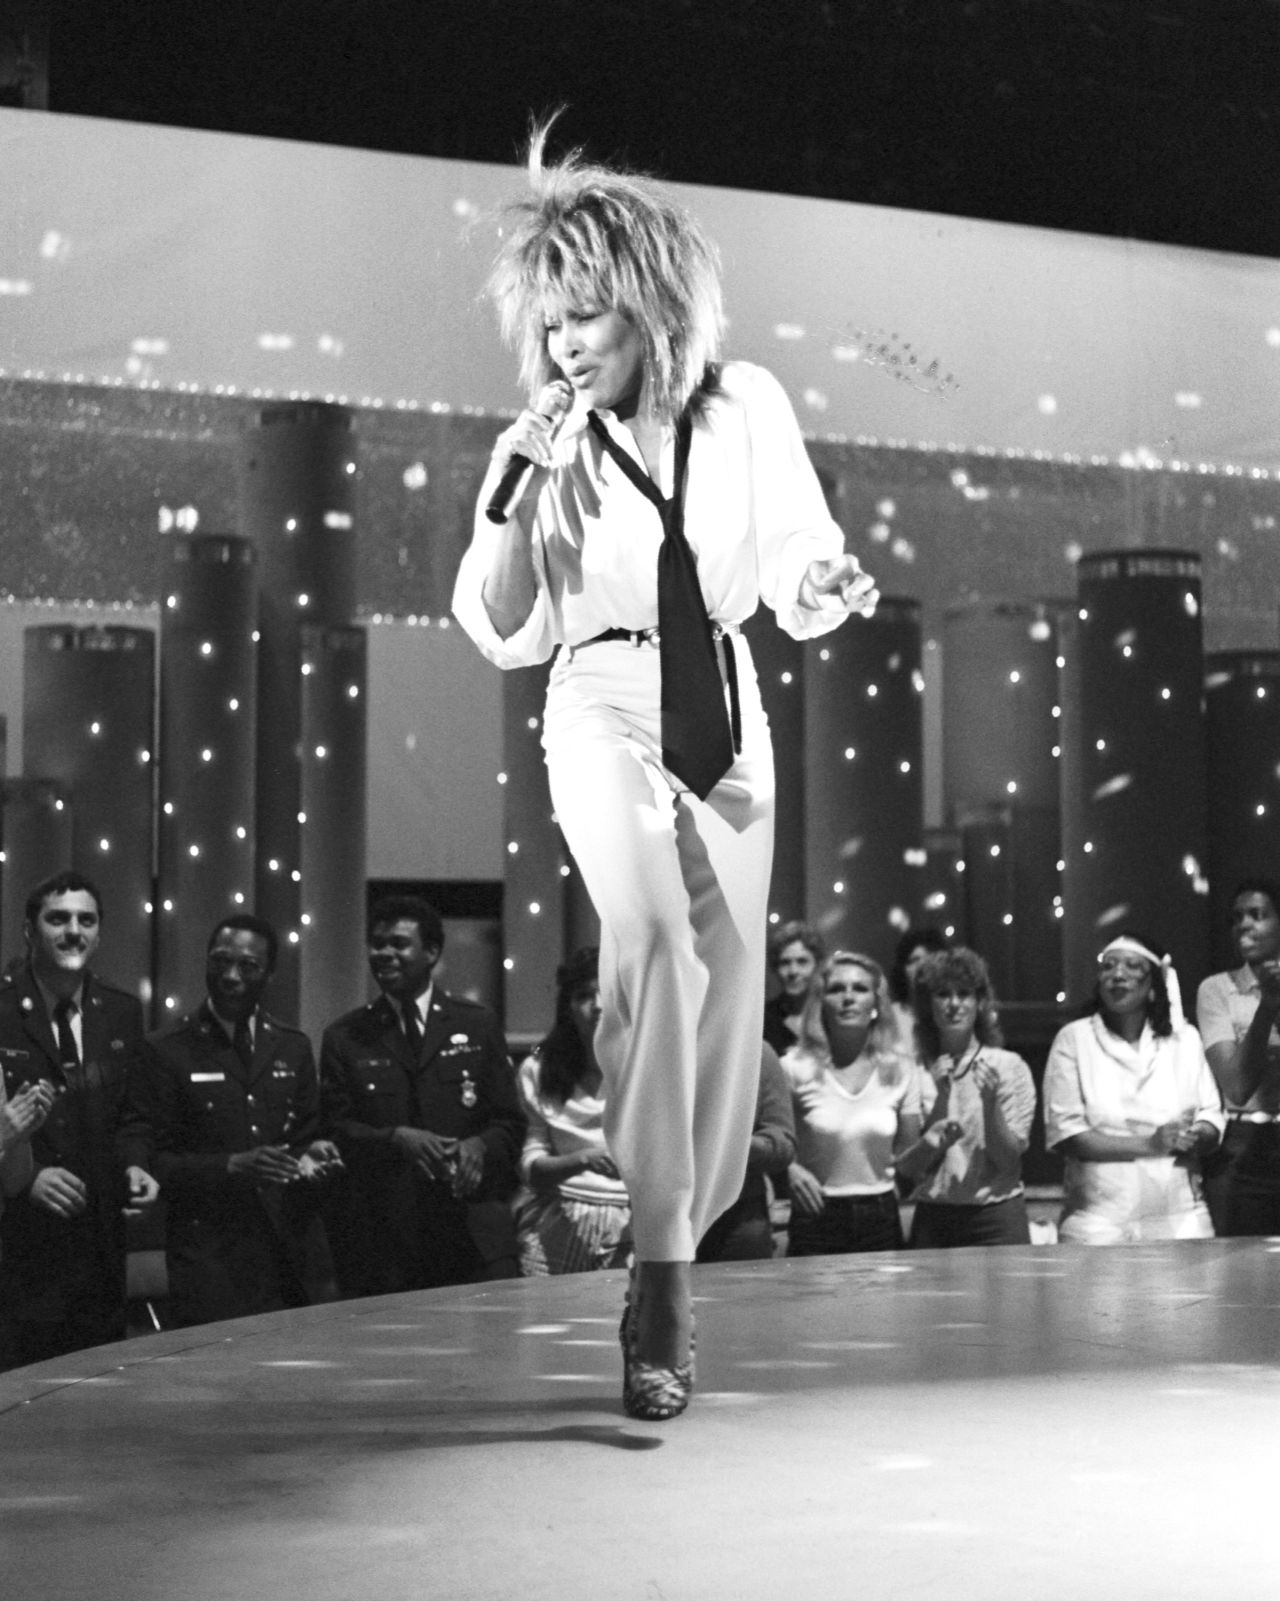 Turner in a blouse and tie while performing for television in Los Angeles in 1984.